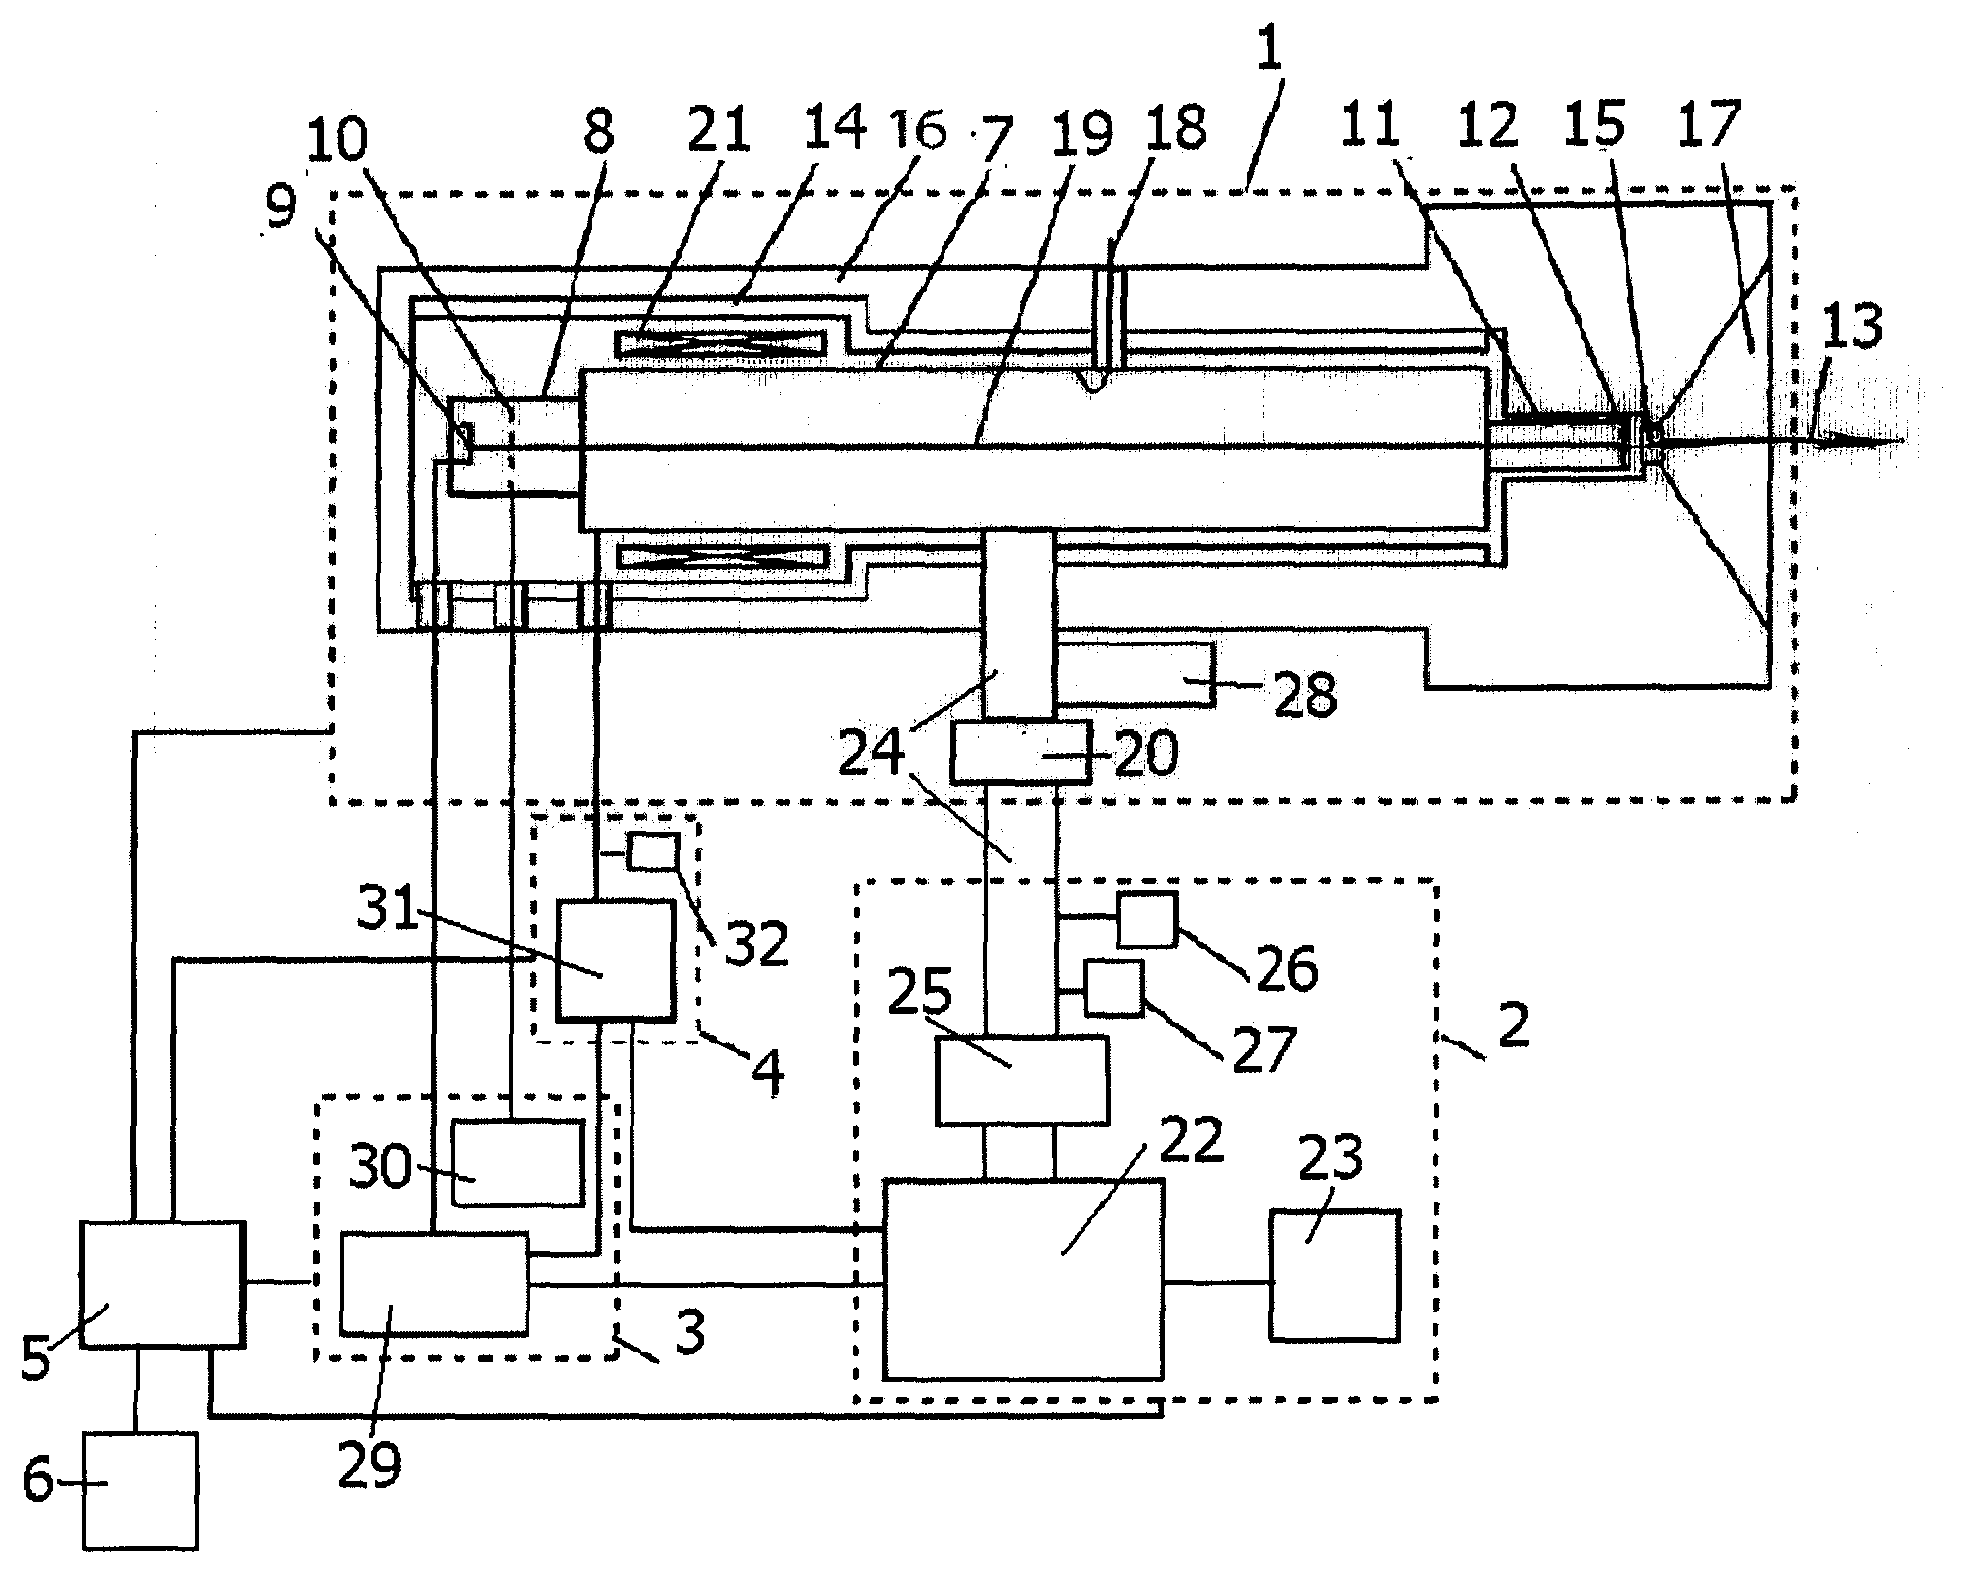 Method and device for generating bremsstrahlung with a pulse-to-pulse variation in energy level between two given values